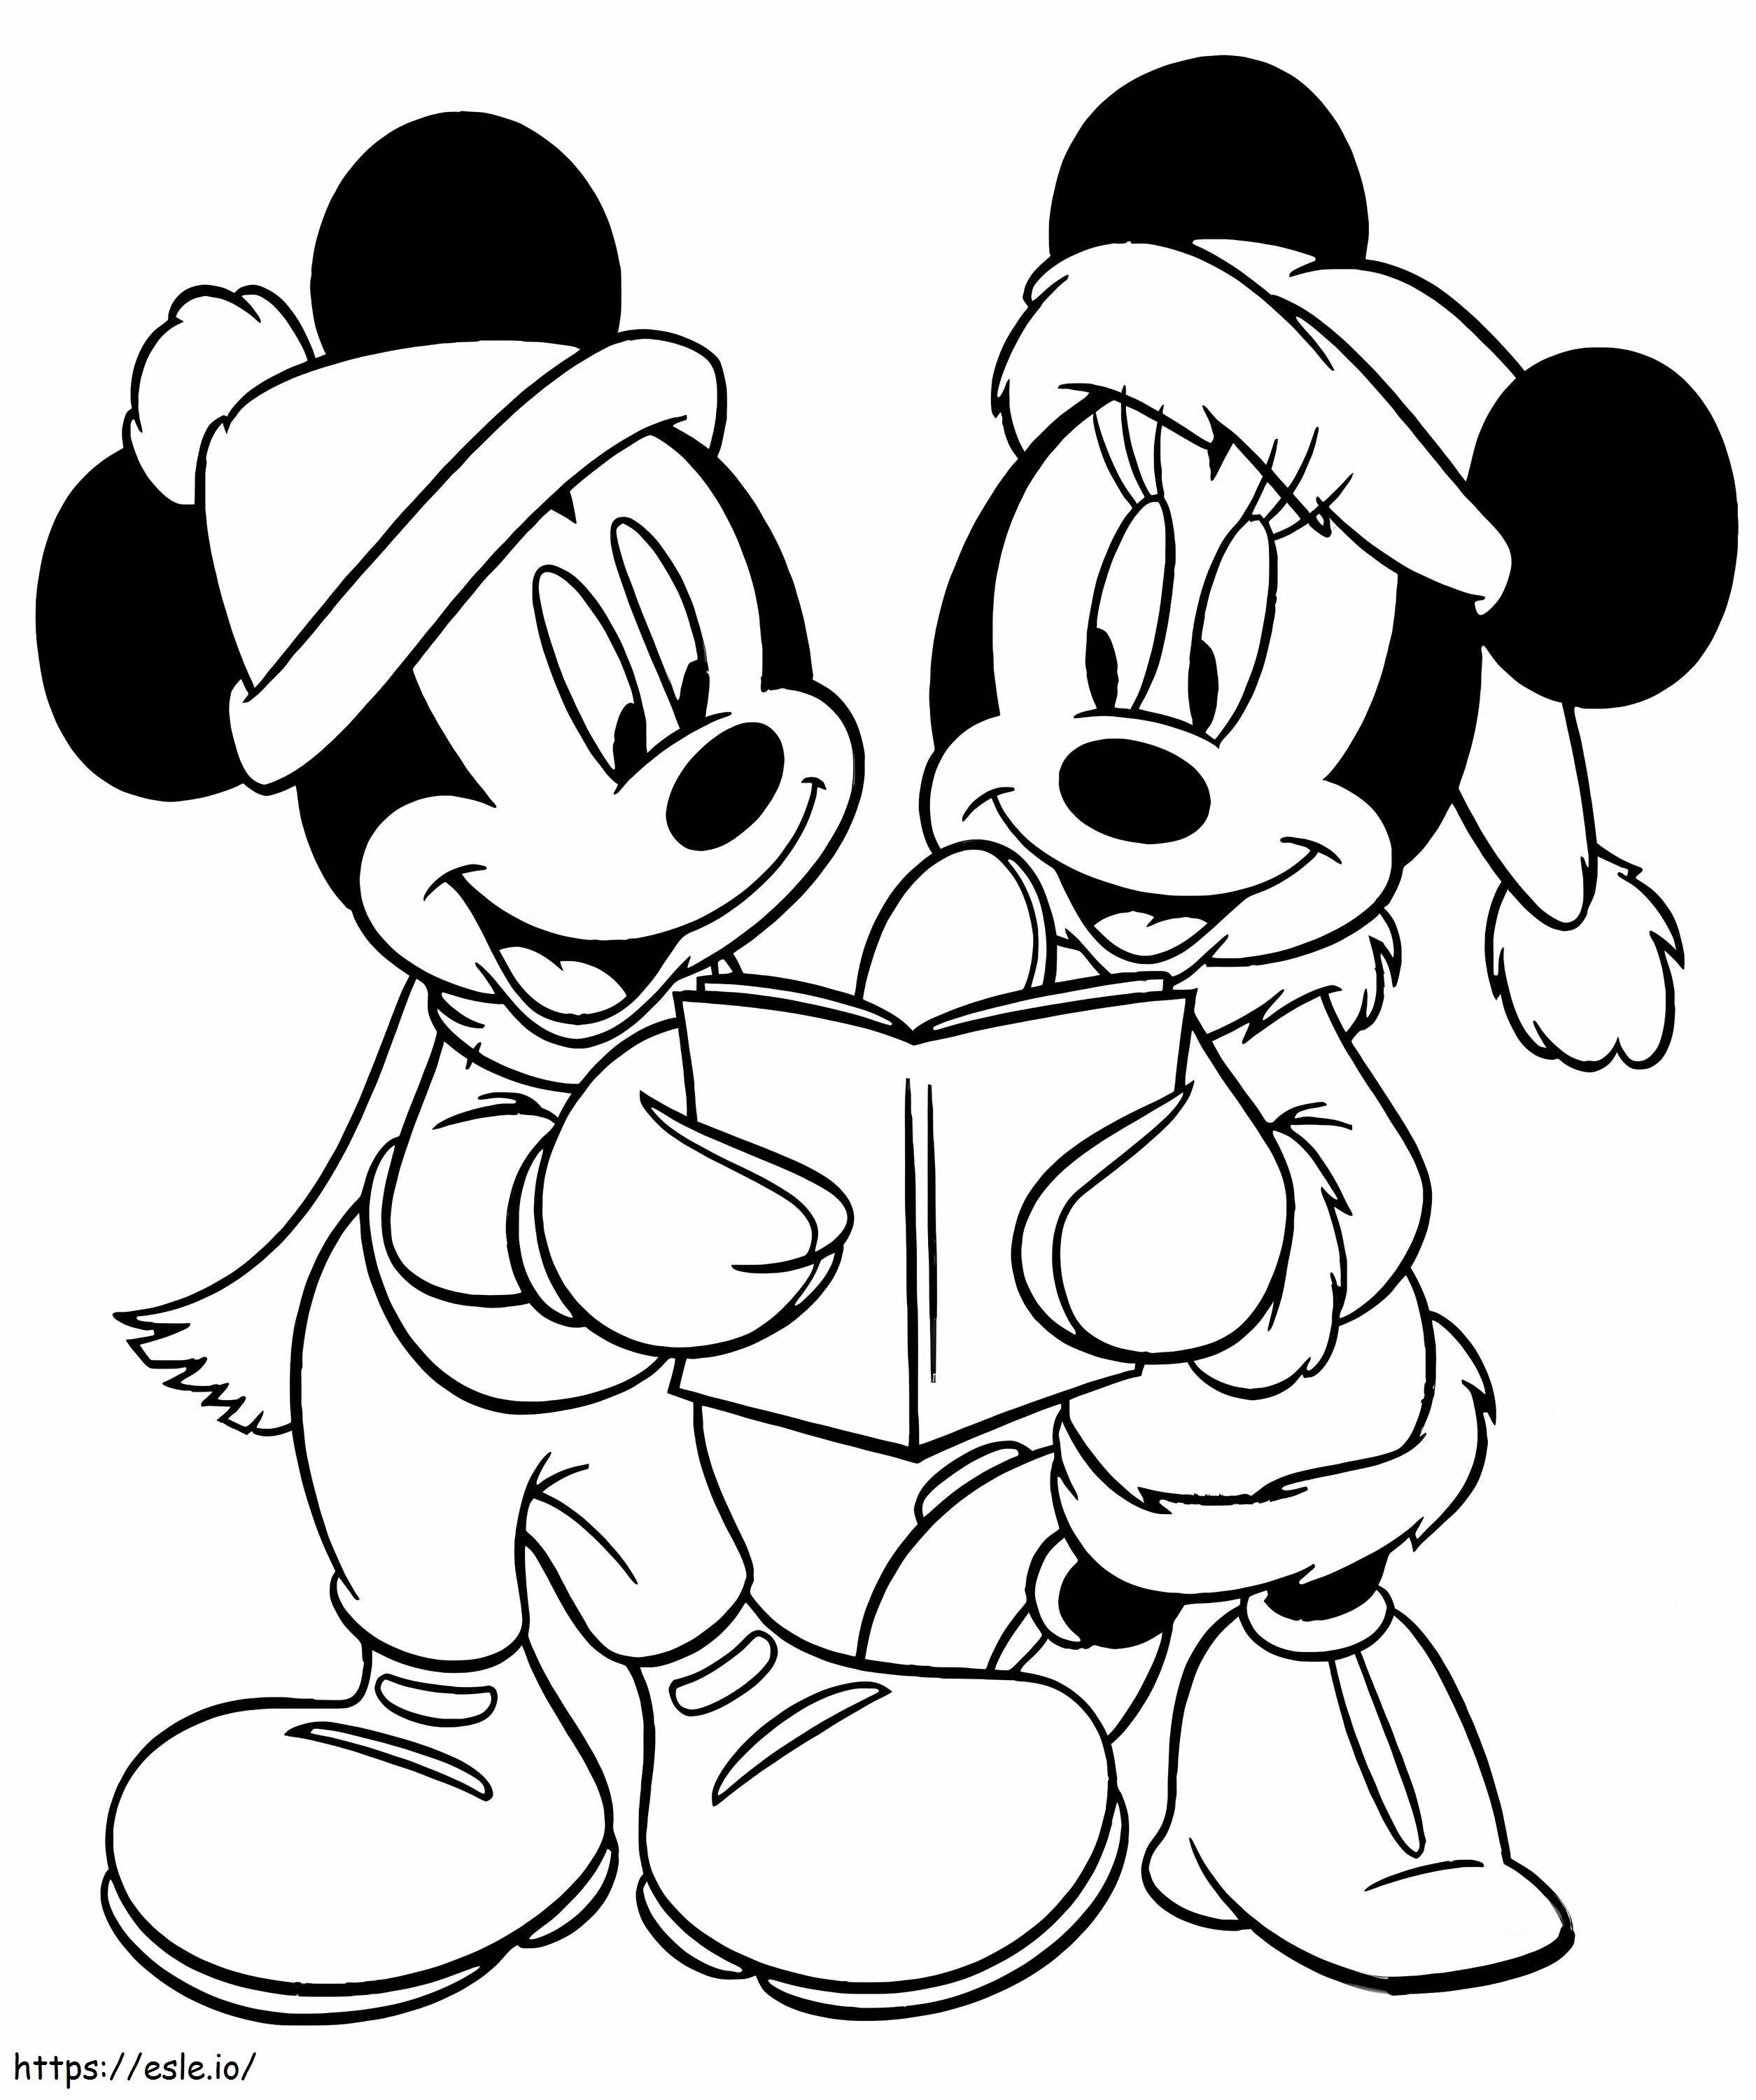 Mickey And Minnie On Christmas coloring page